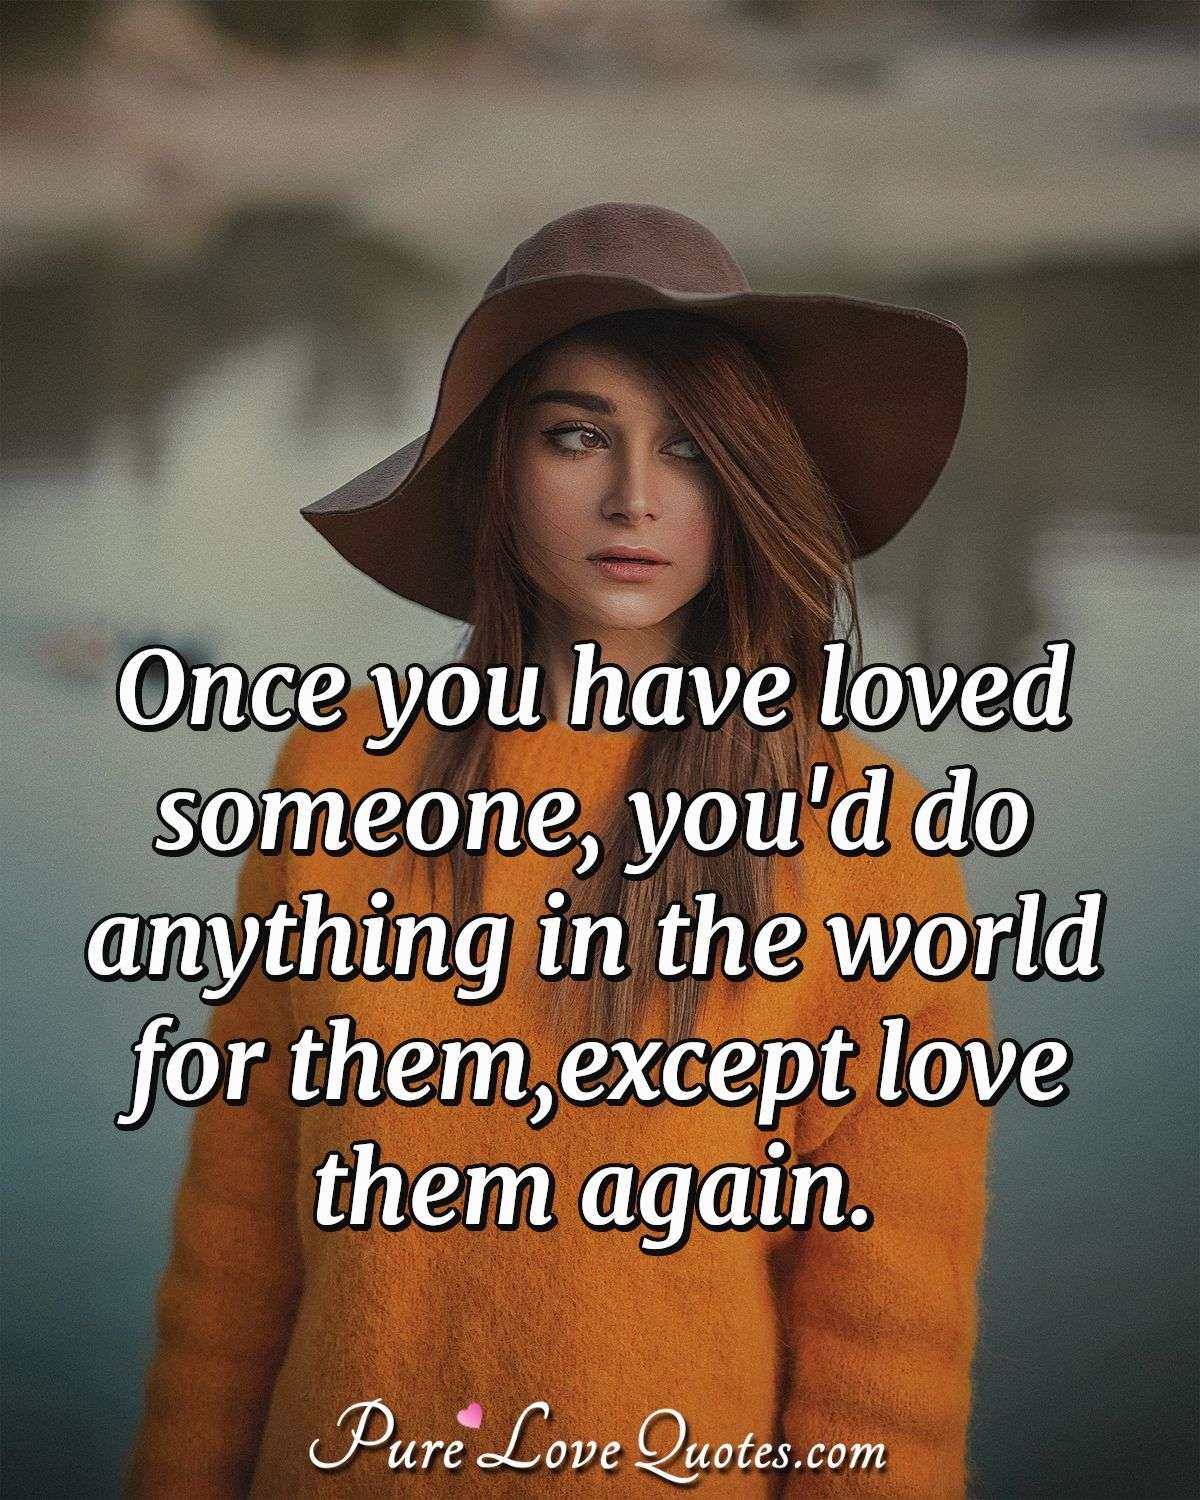 Once you have loved someone, you'd do anything in the world for them, except love them again. - Anonymous